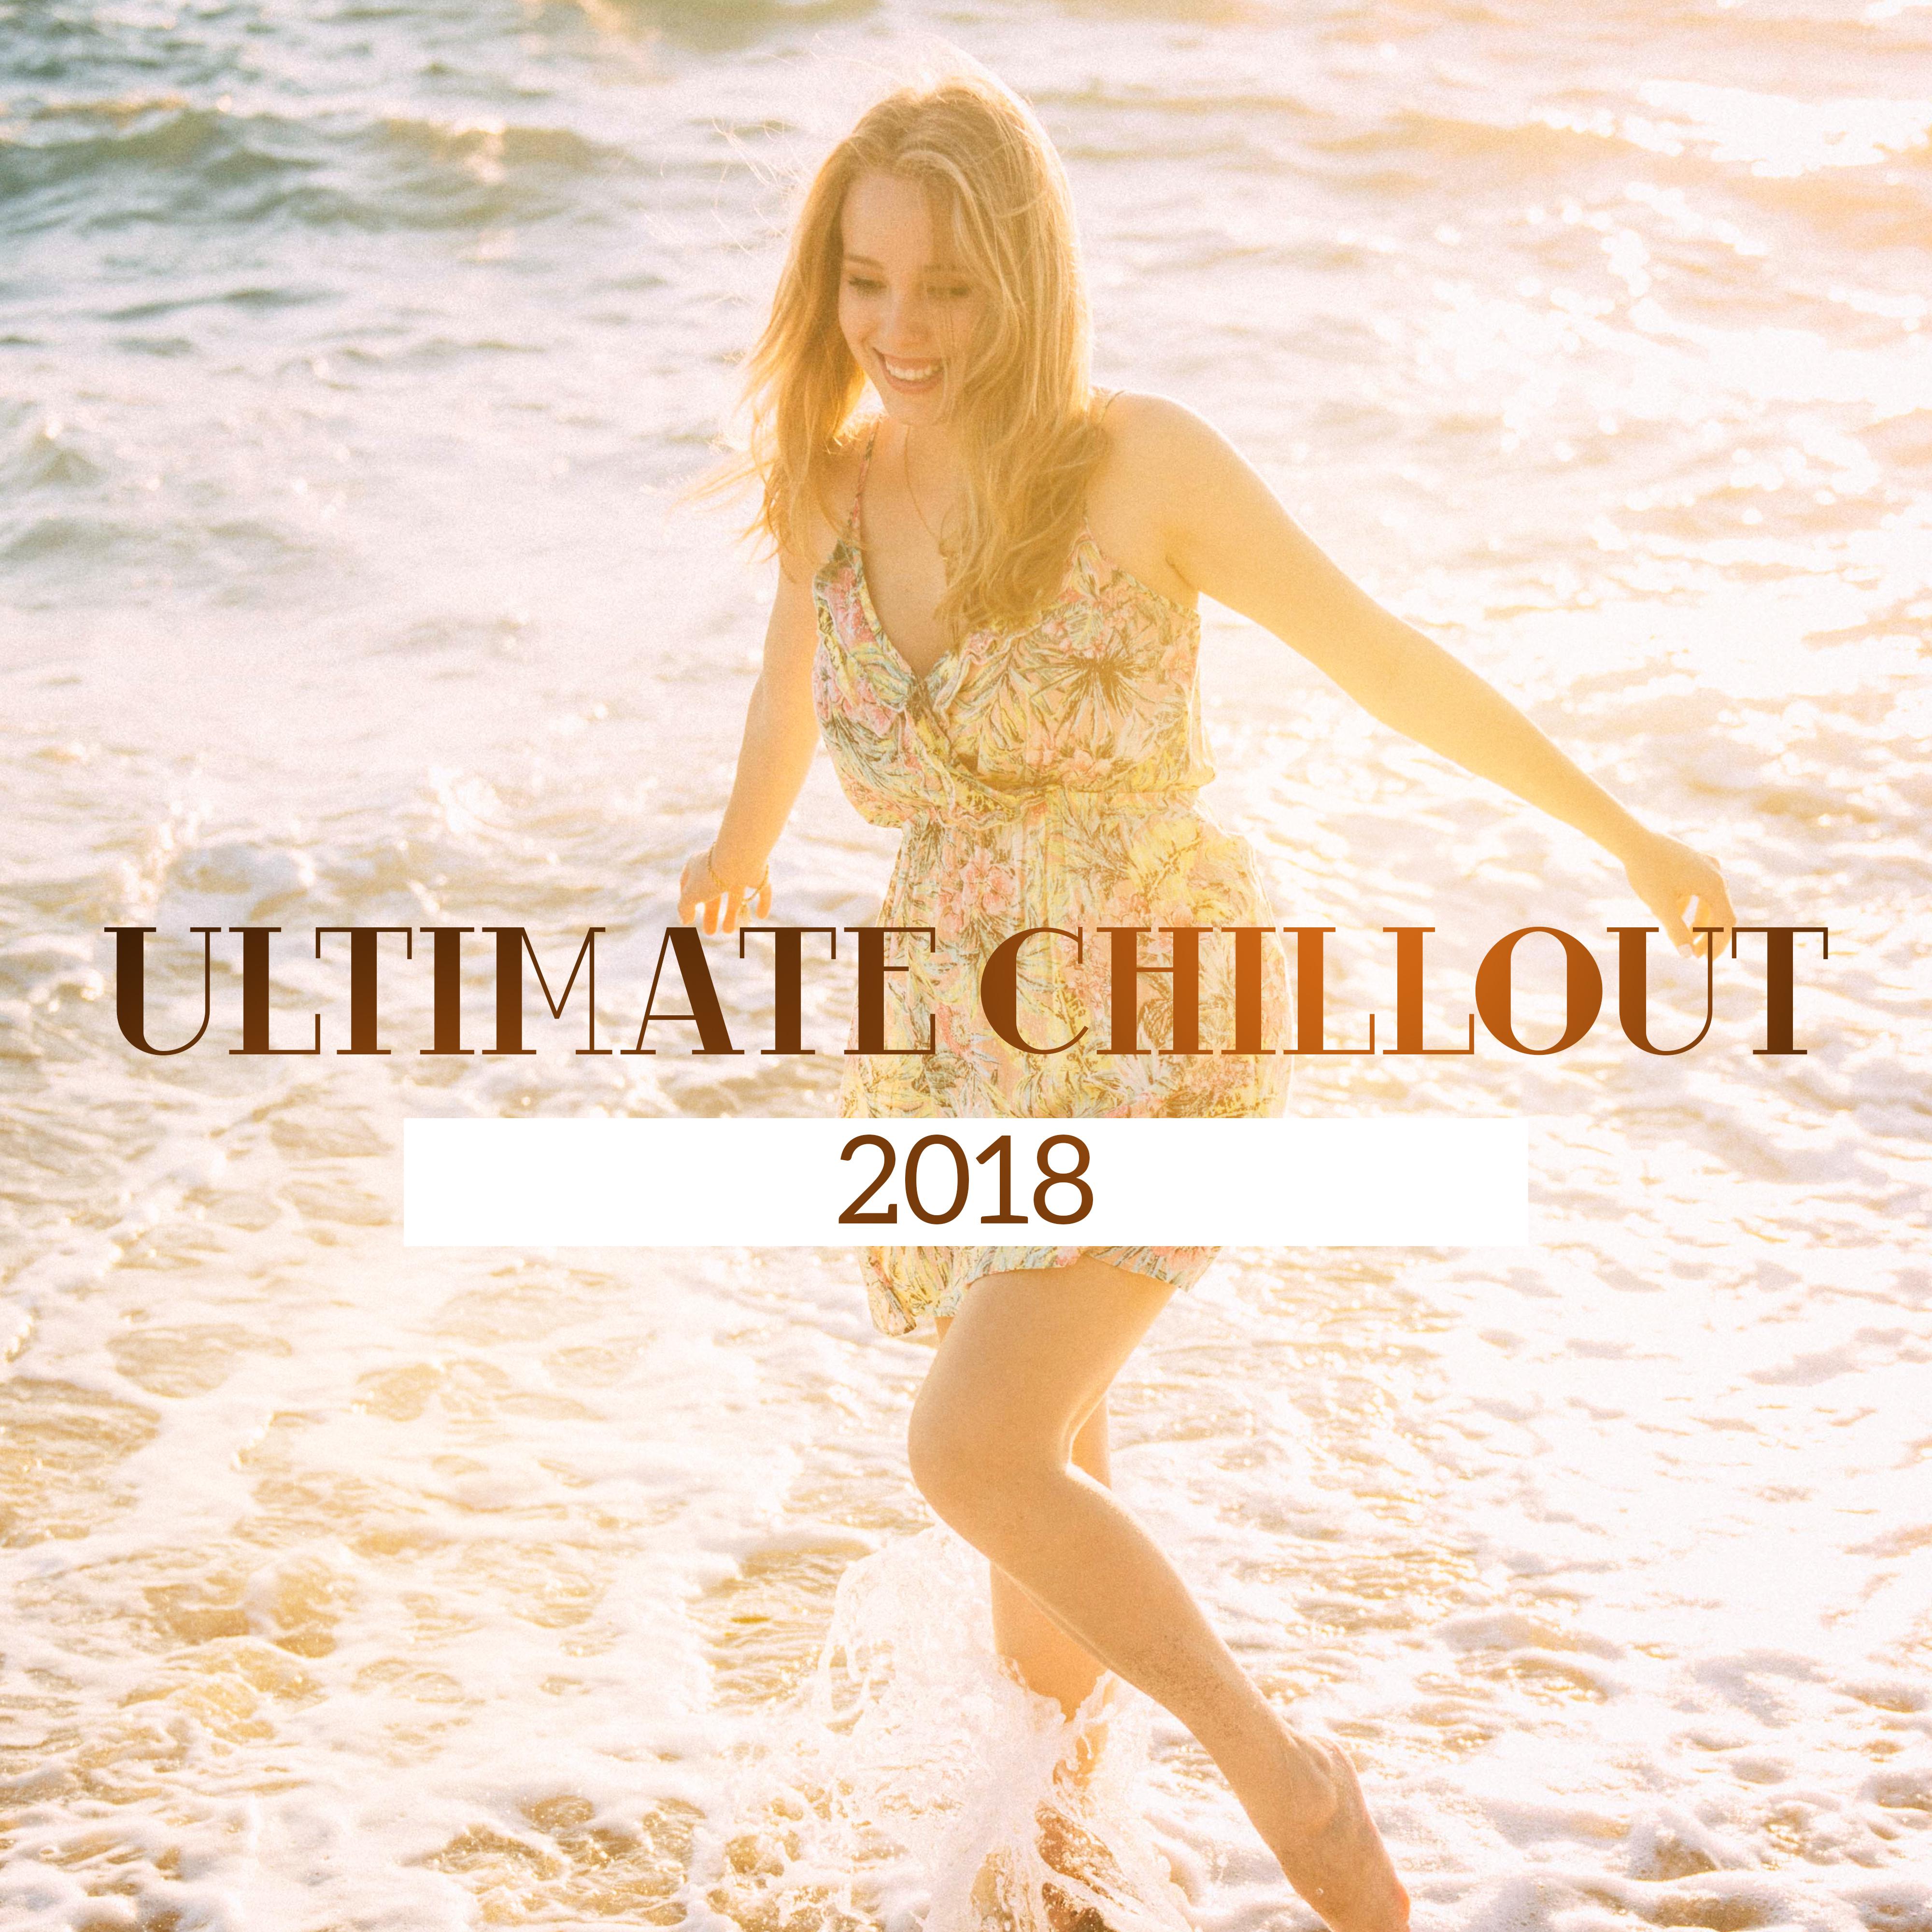 Ultimate Chillout 2018